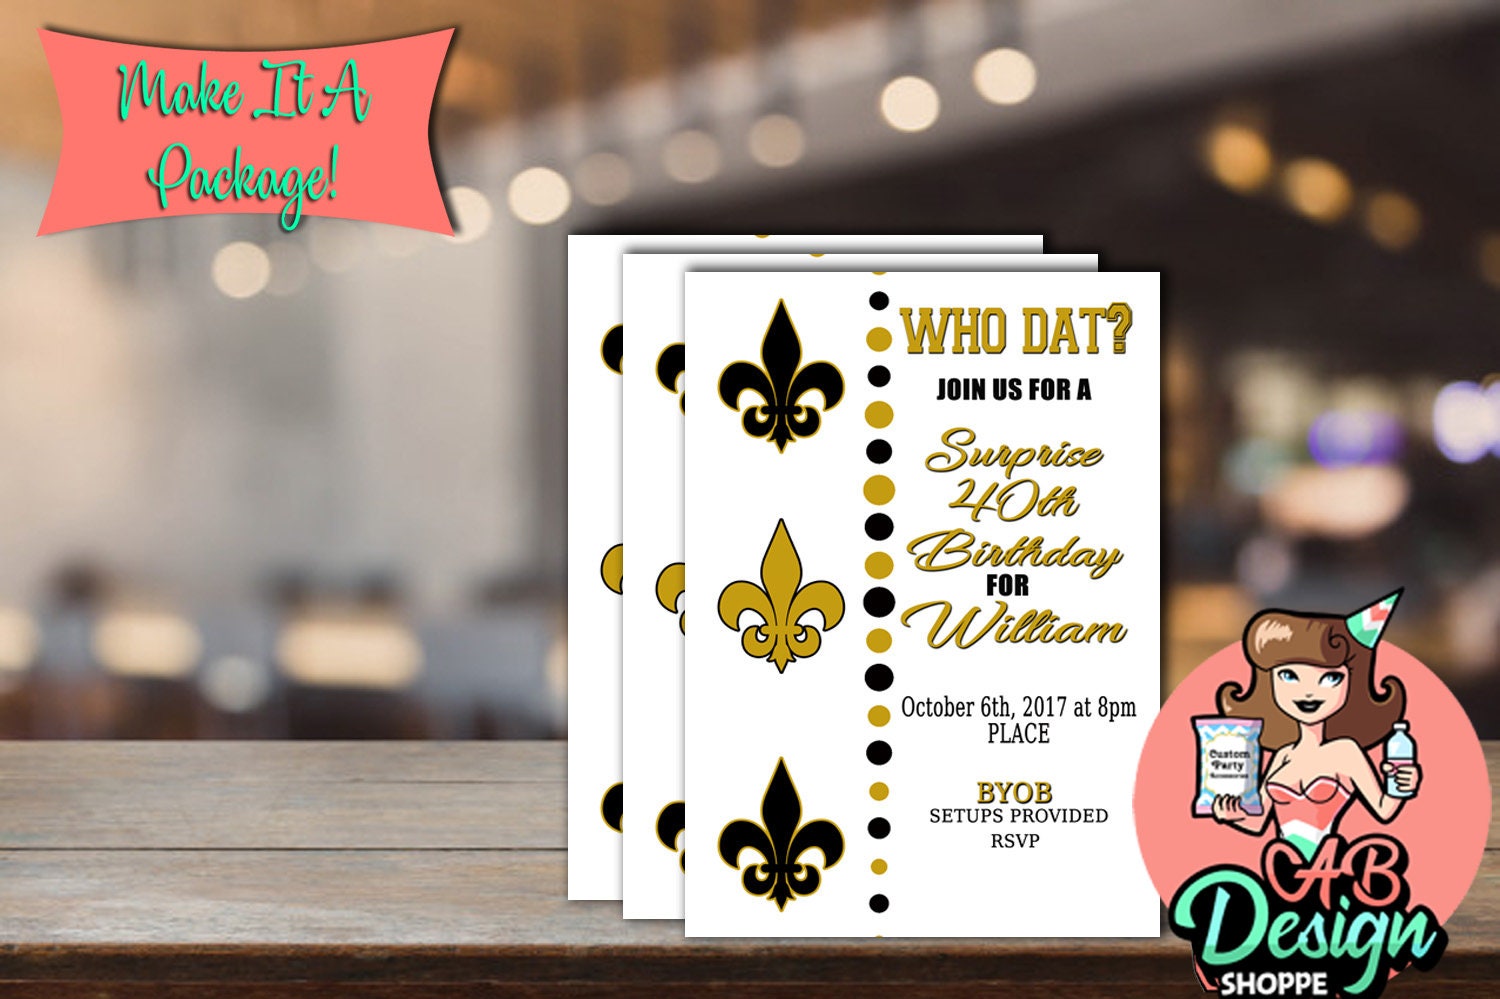 New Orleans Saints Custom Candy Bar Wrappers – Sports Invites